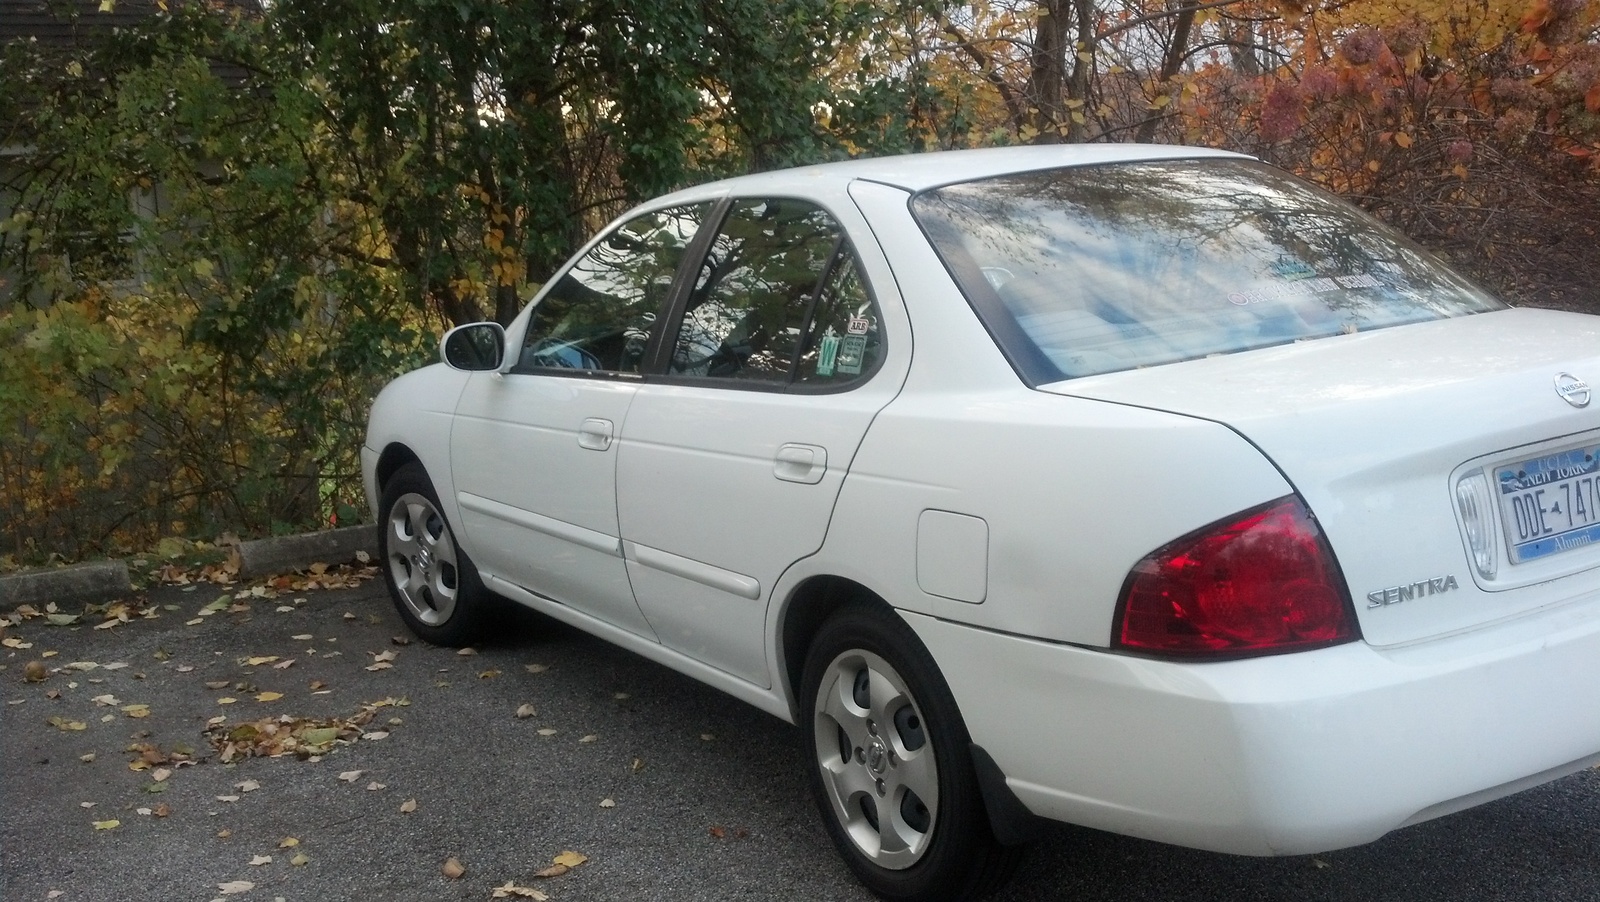 2004 Nissan sentra 2.5 s review